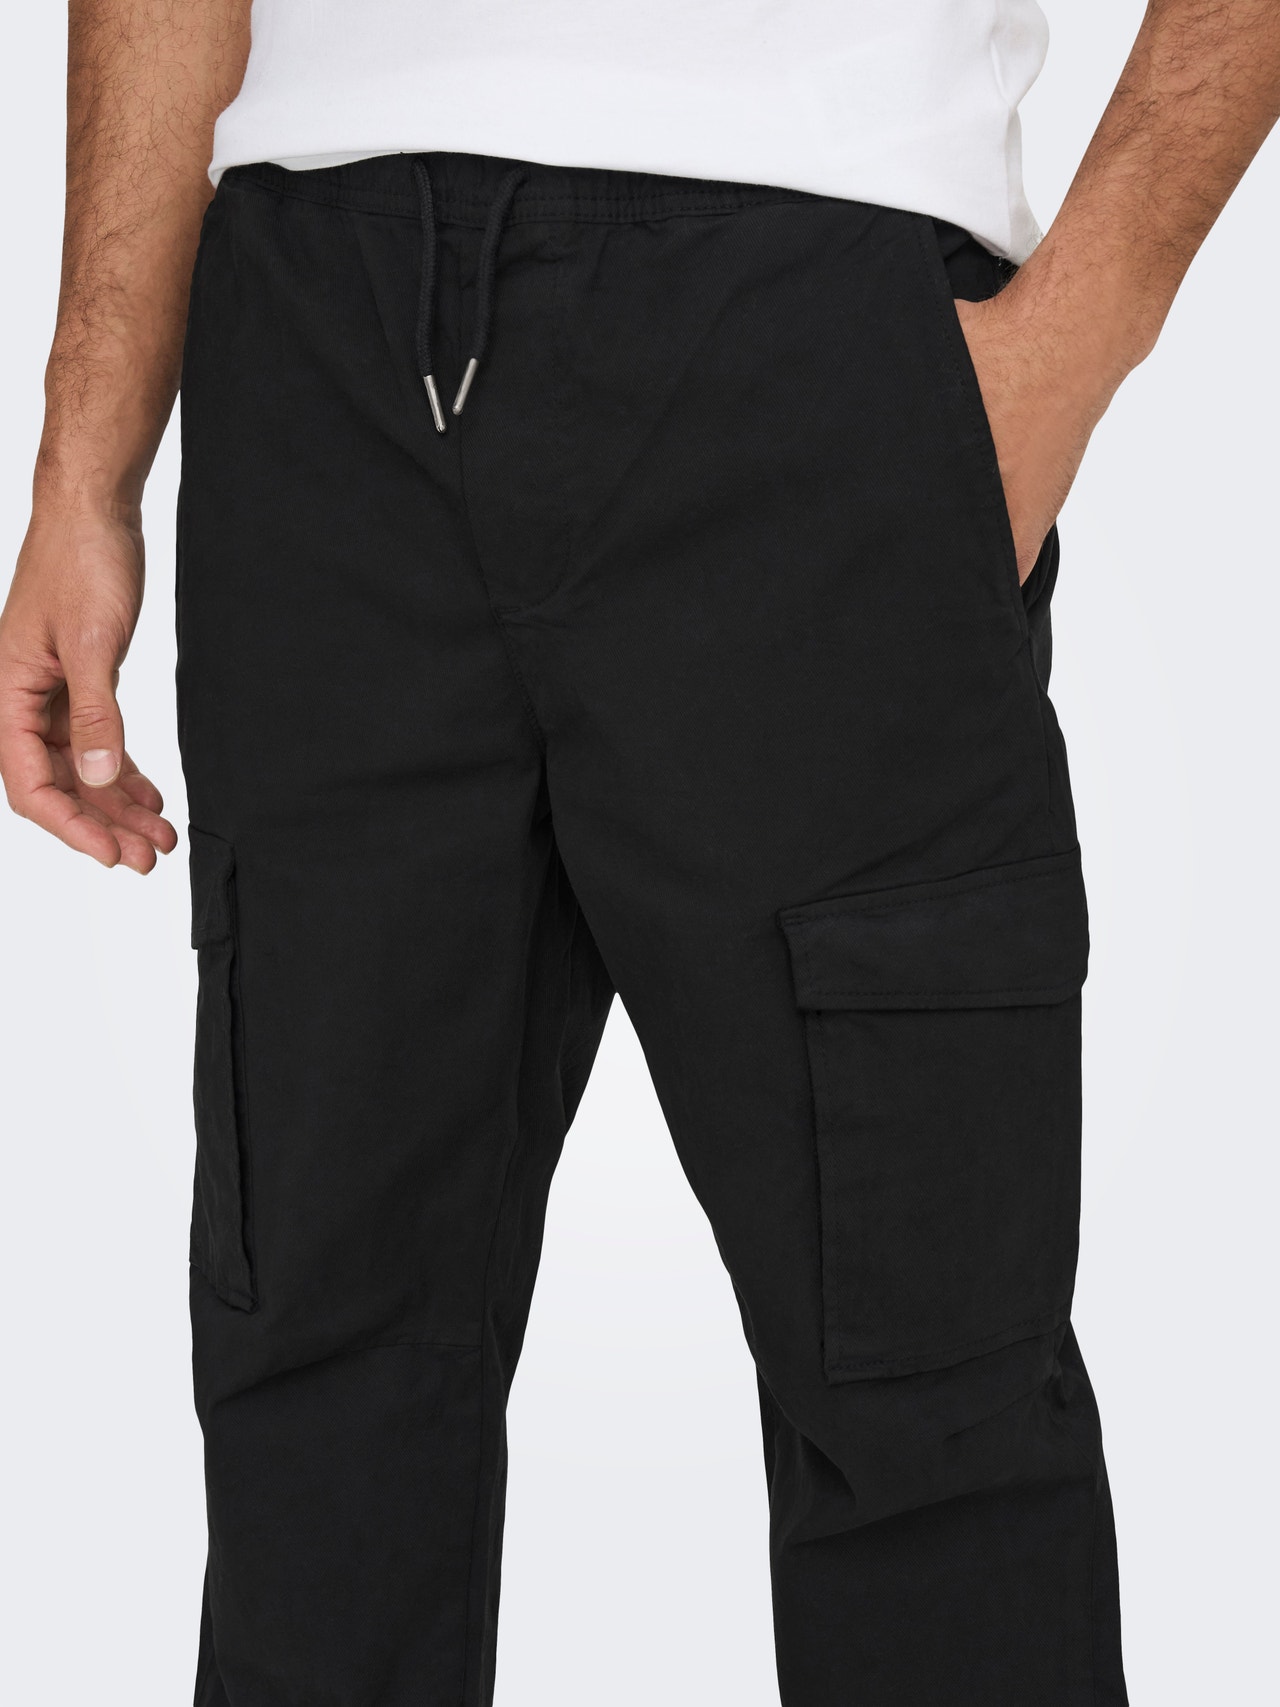 ONLY & SONS ONSELL TAPERED CARGO 4485 PANT -Black - 22024485